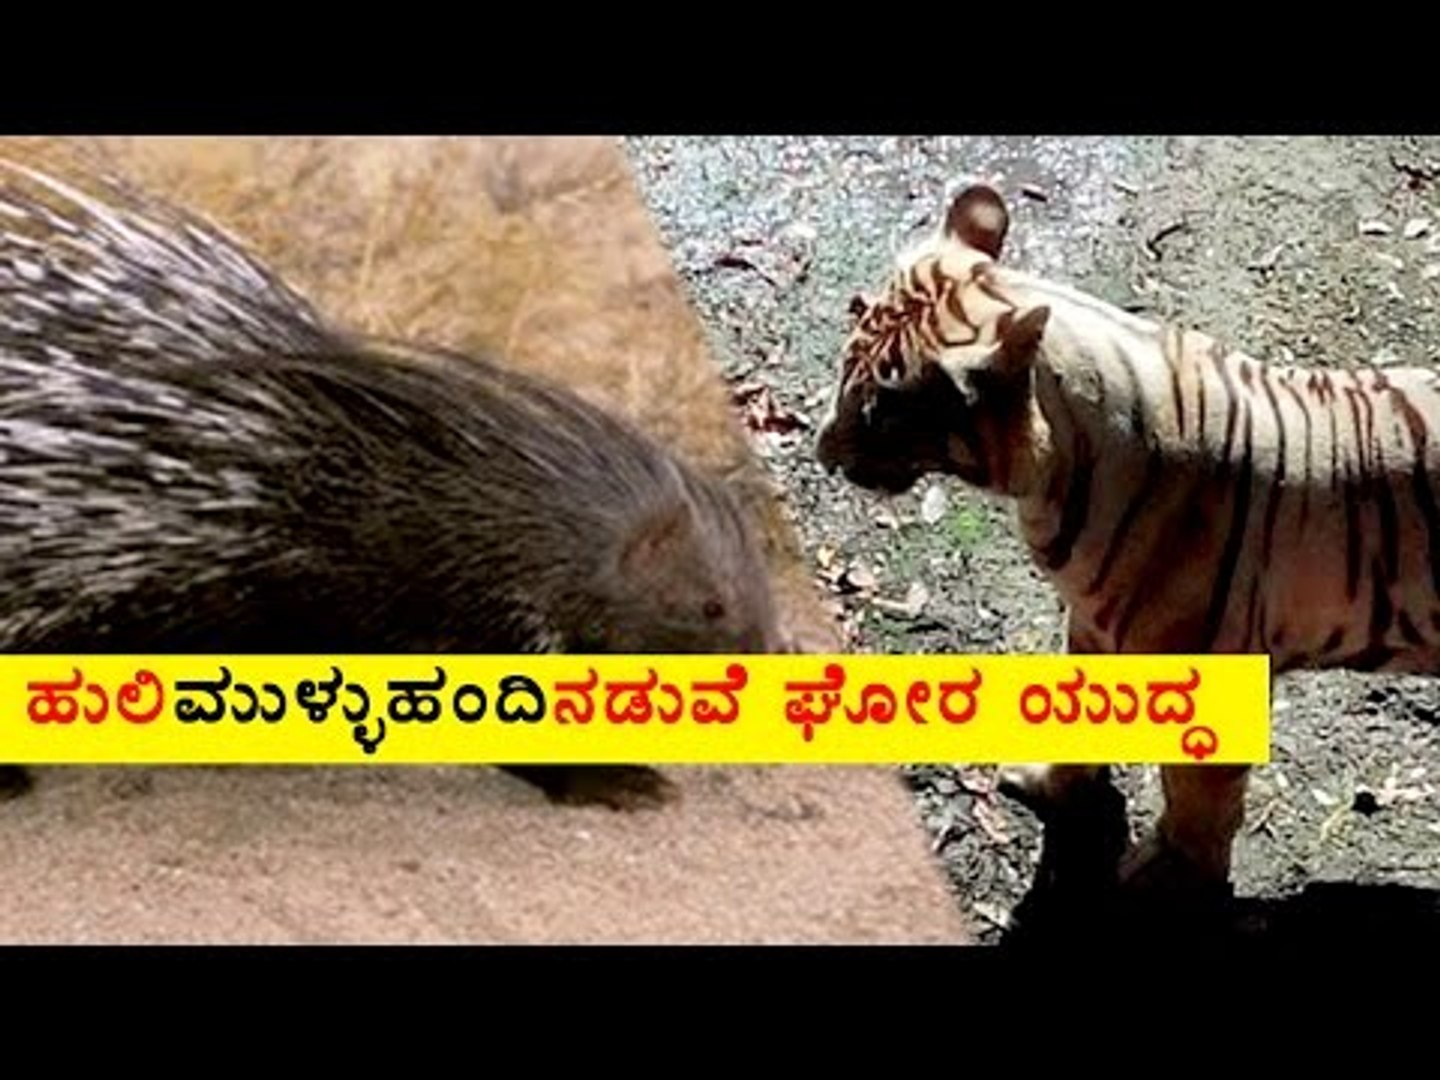 Tiger Fought With Porcupine & Found Dead! | OneIndia Kannada